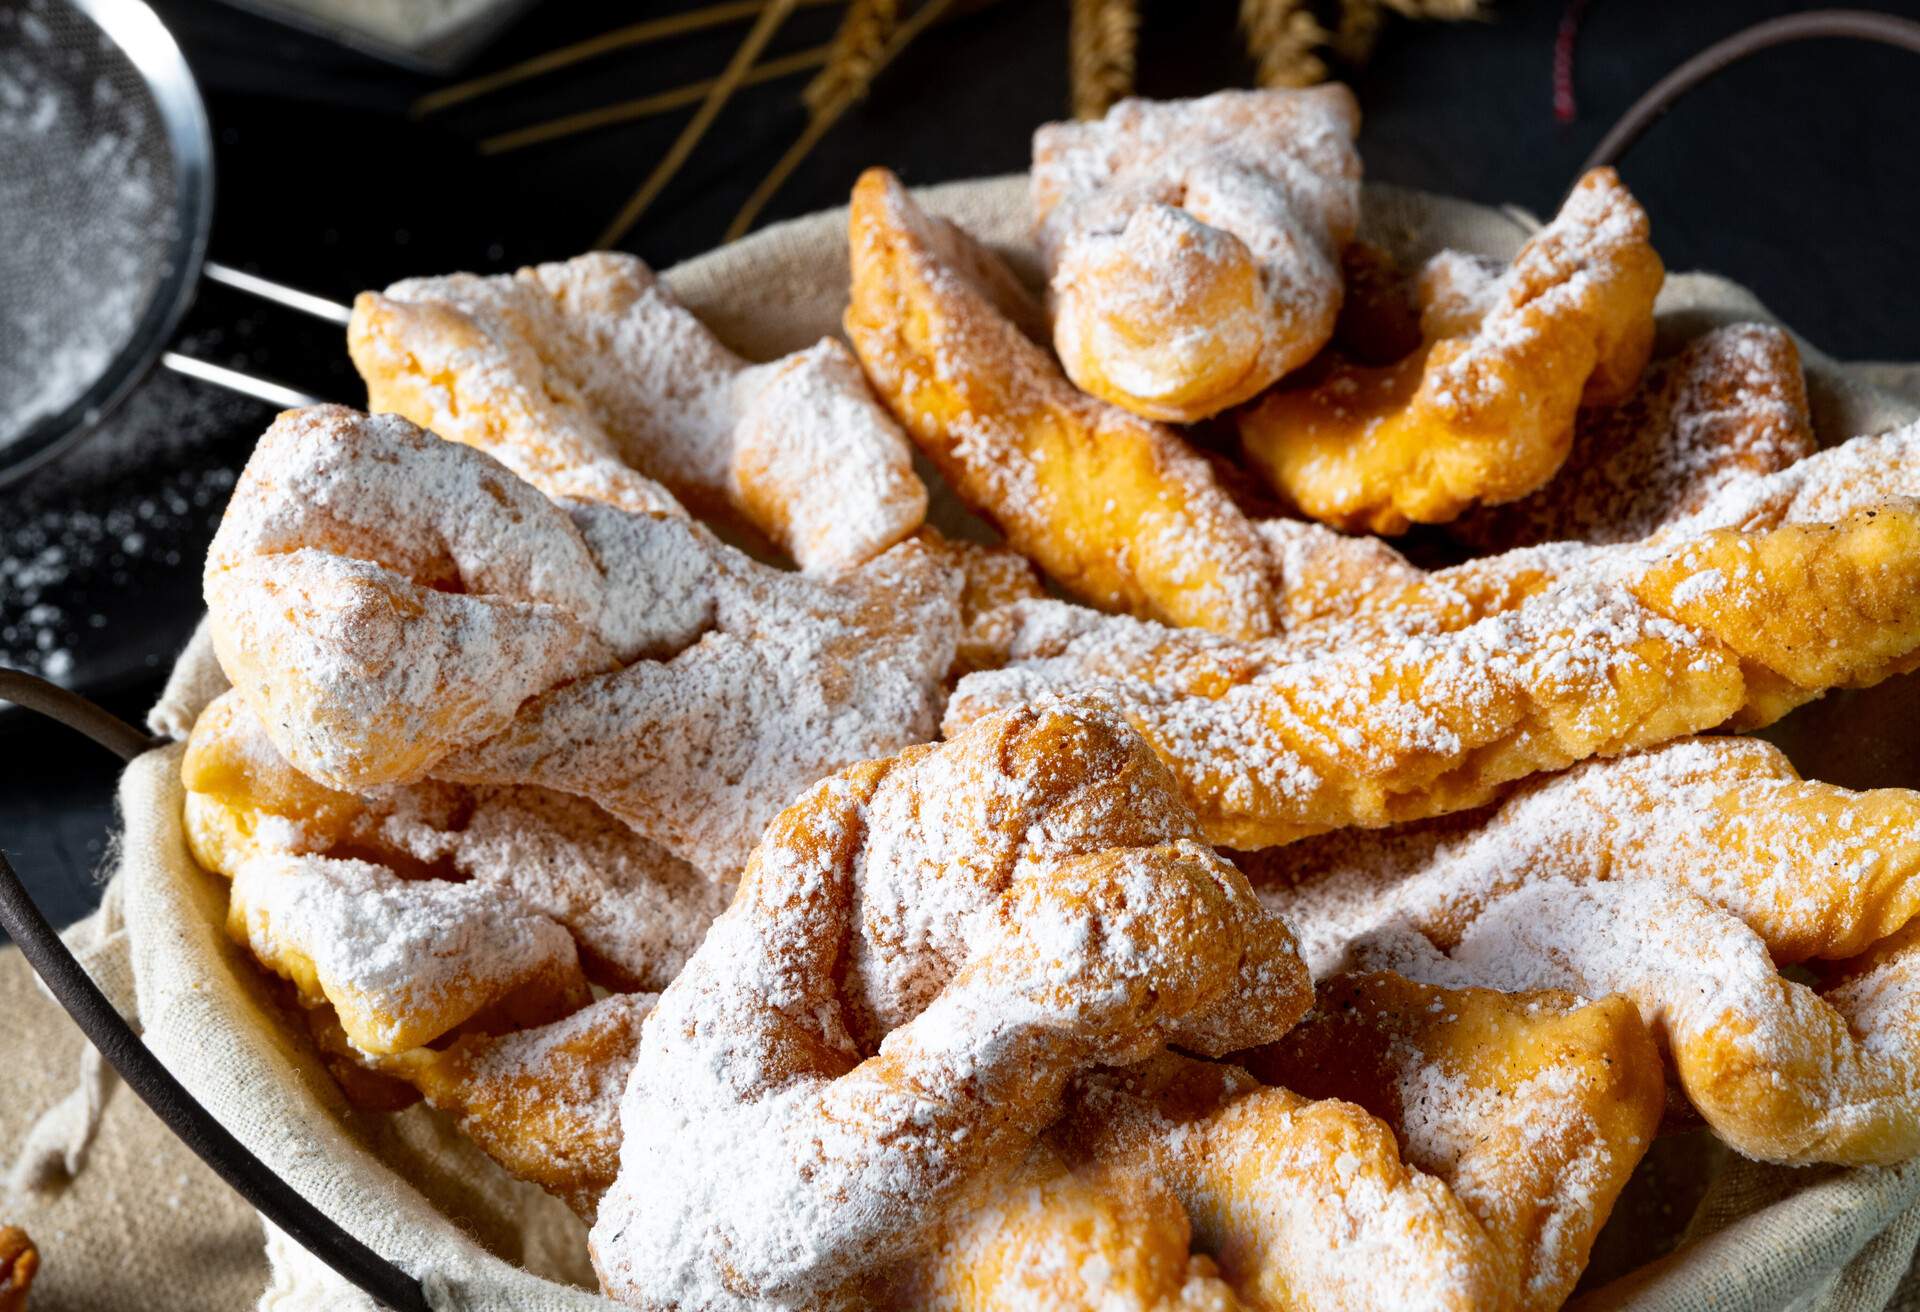 A basket of traditional Polish lard pastry dusted with powdered sugar.